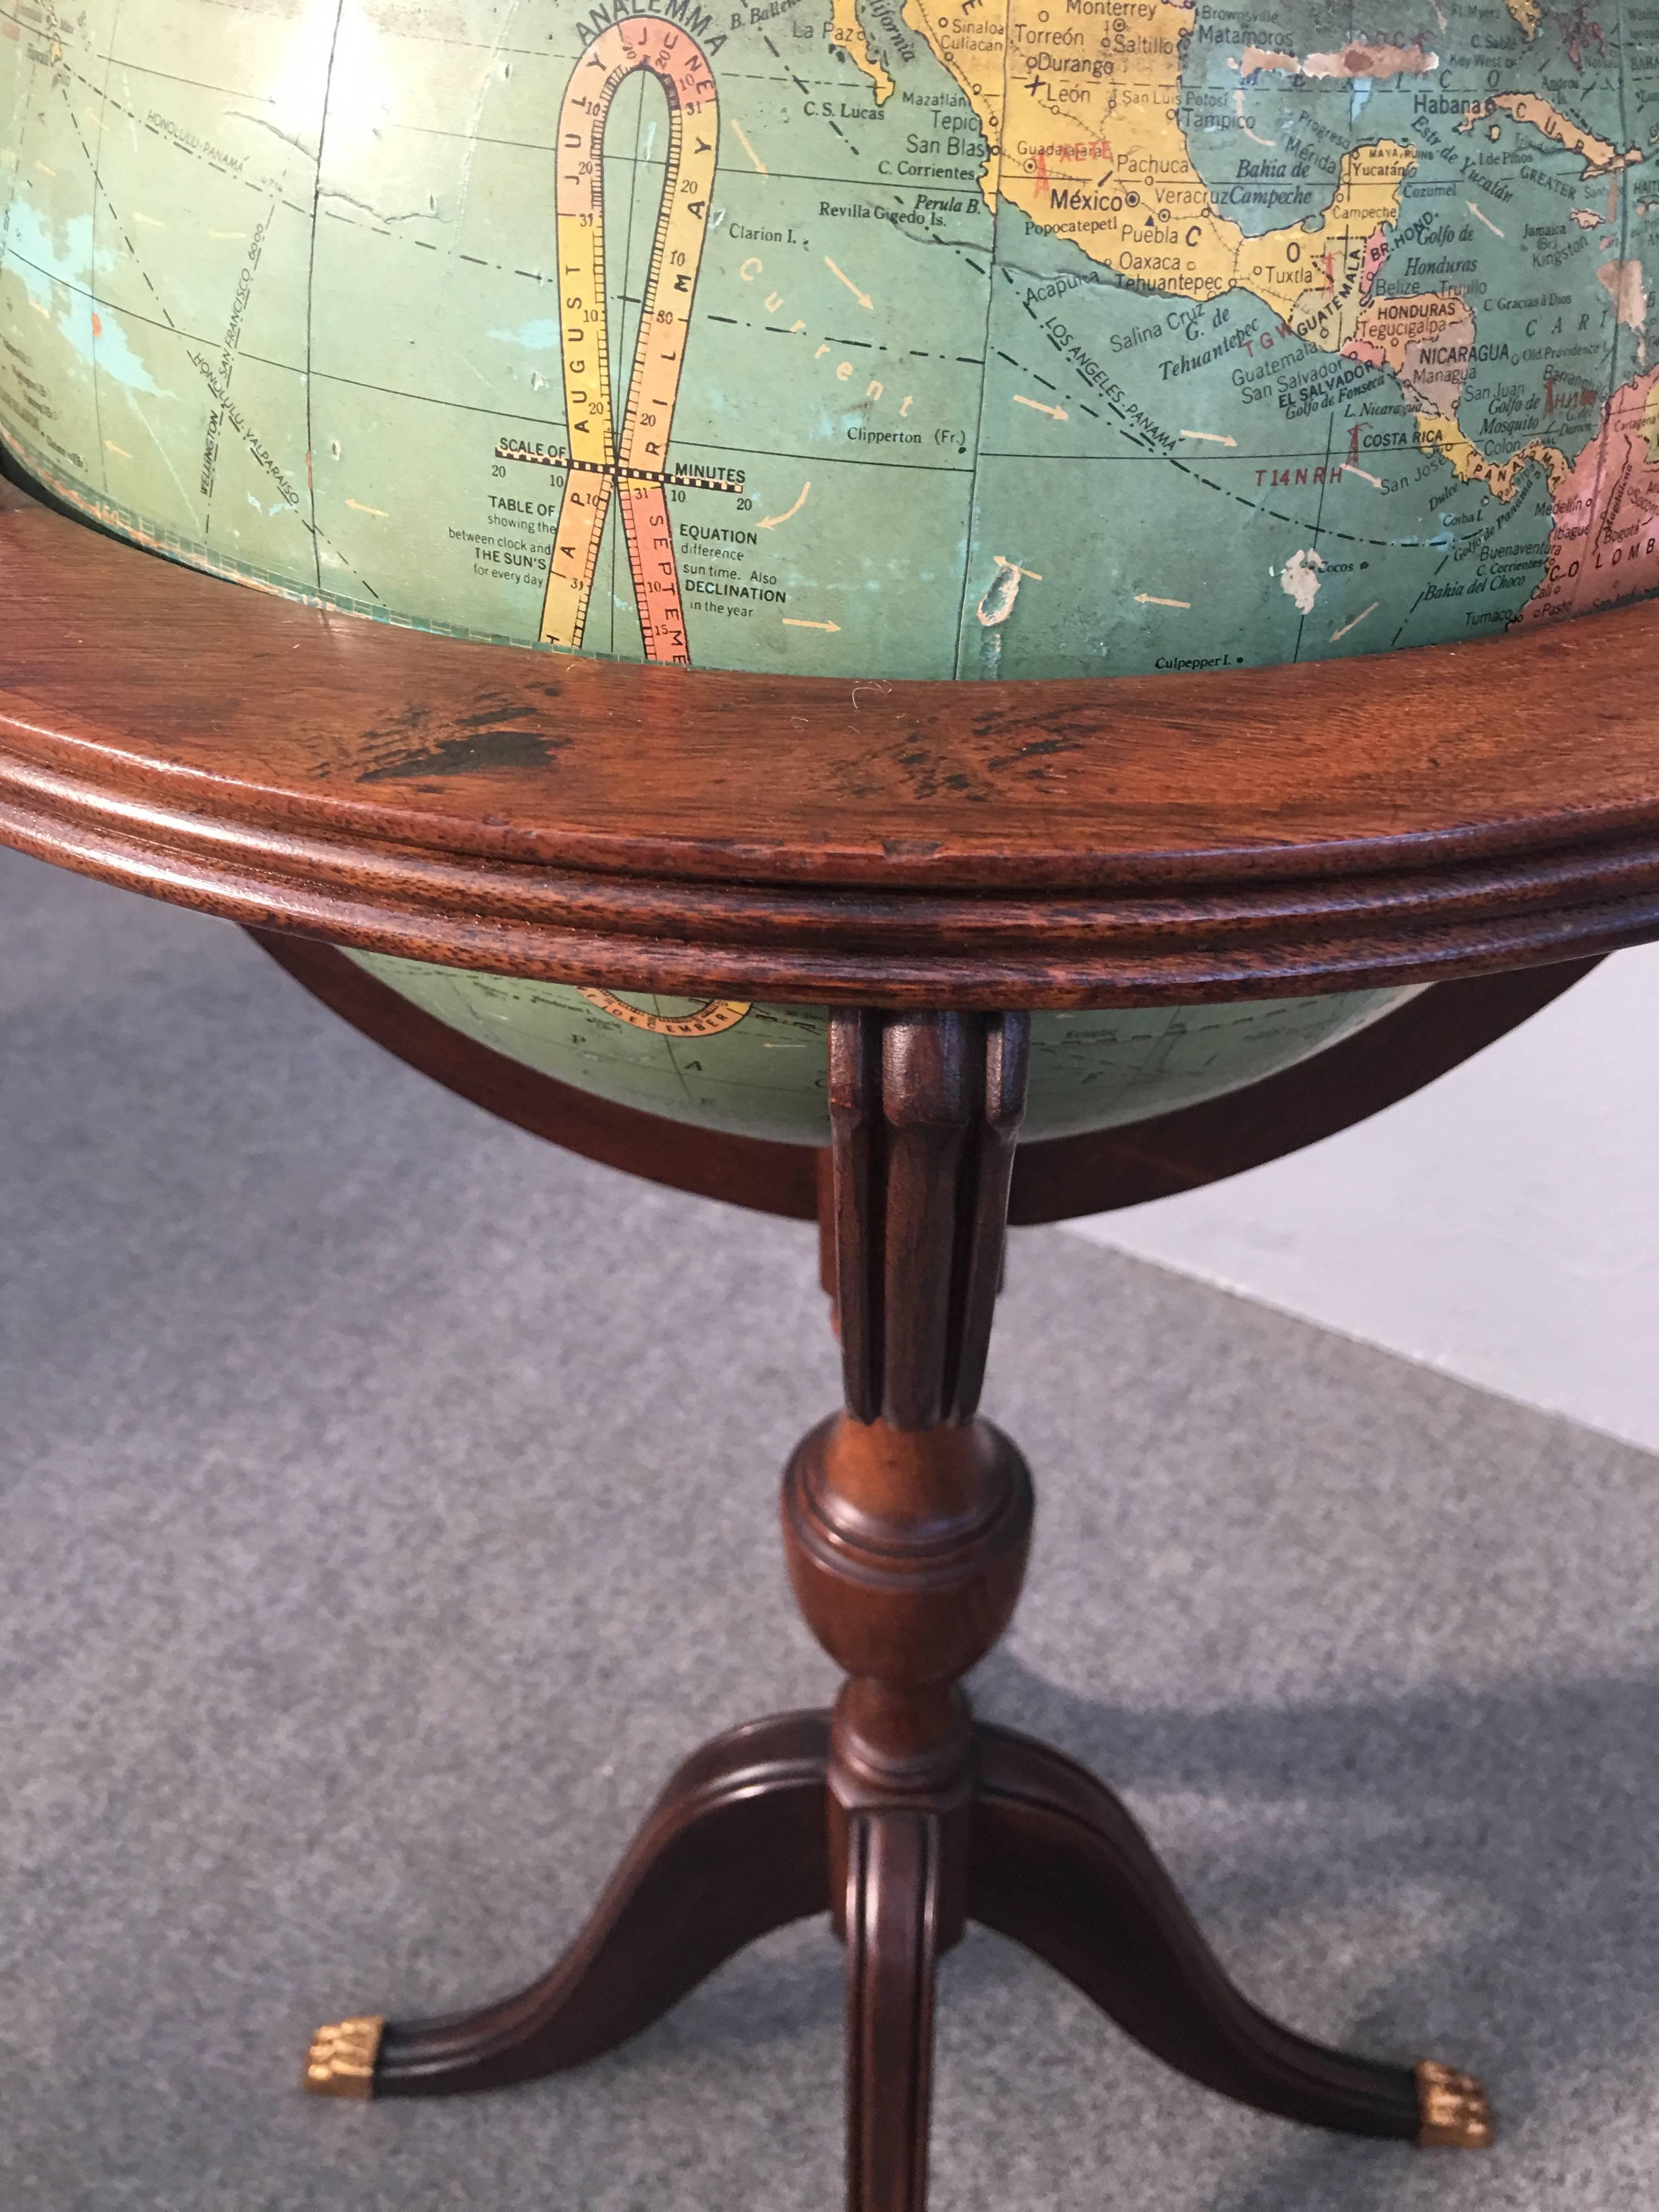 Terrestrial Globe Made by Replogle Globes, Chicago 1